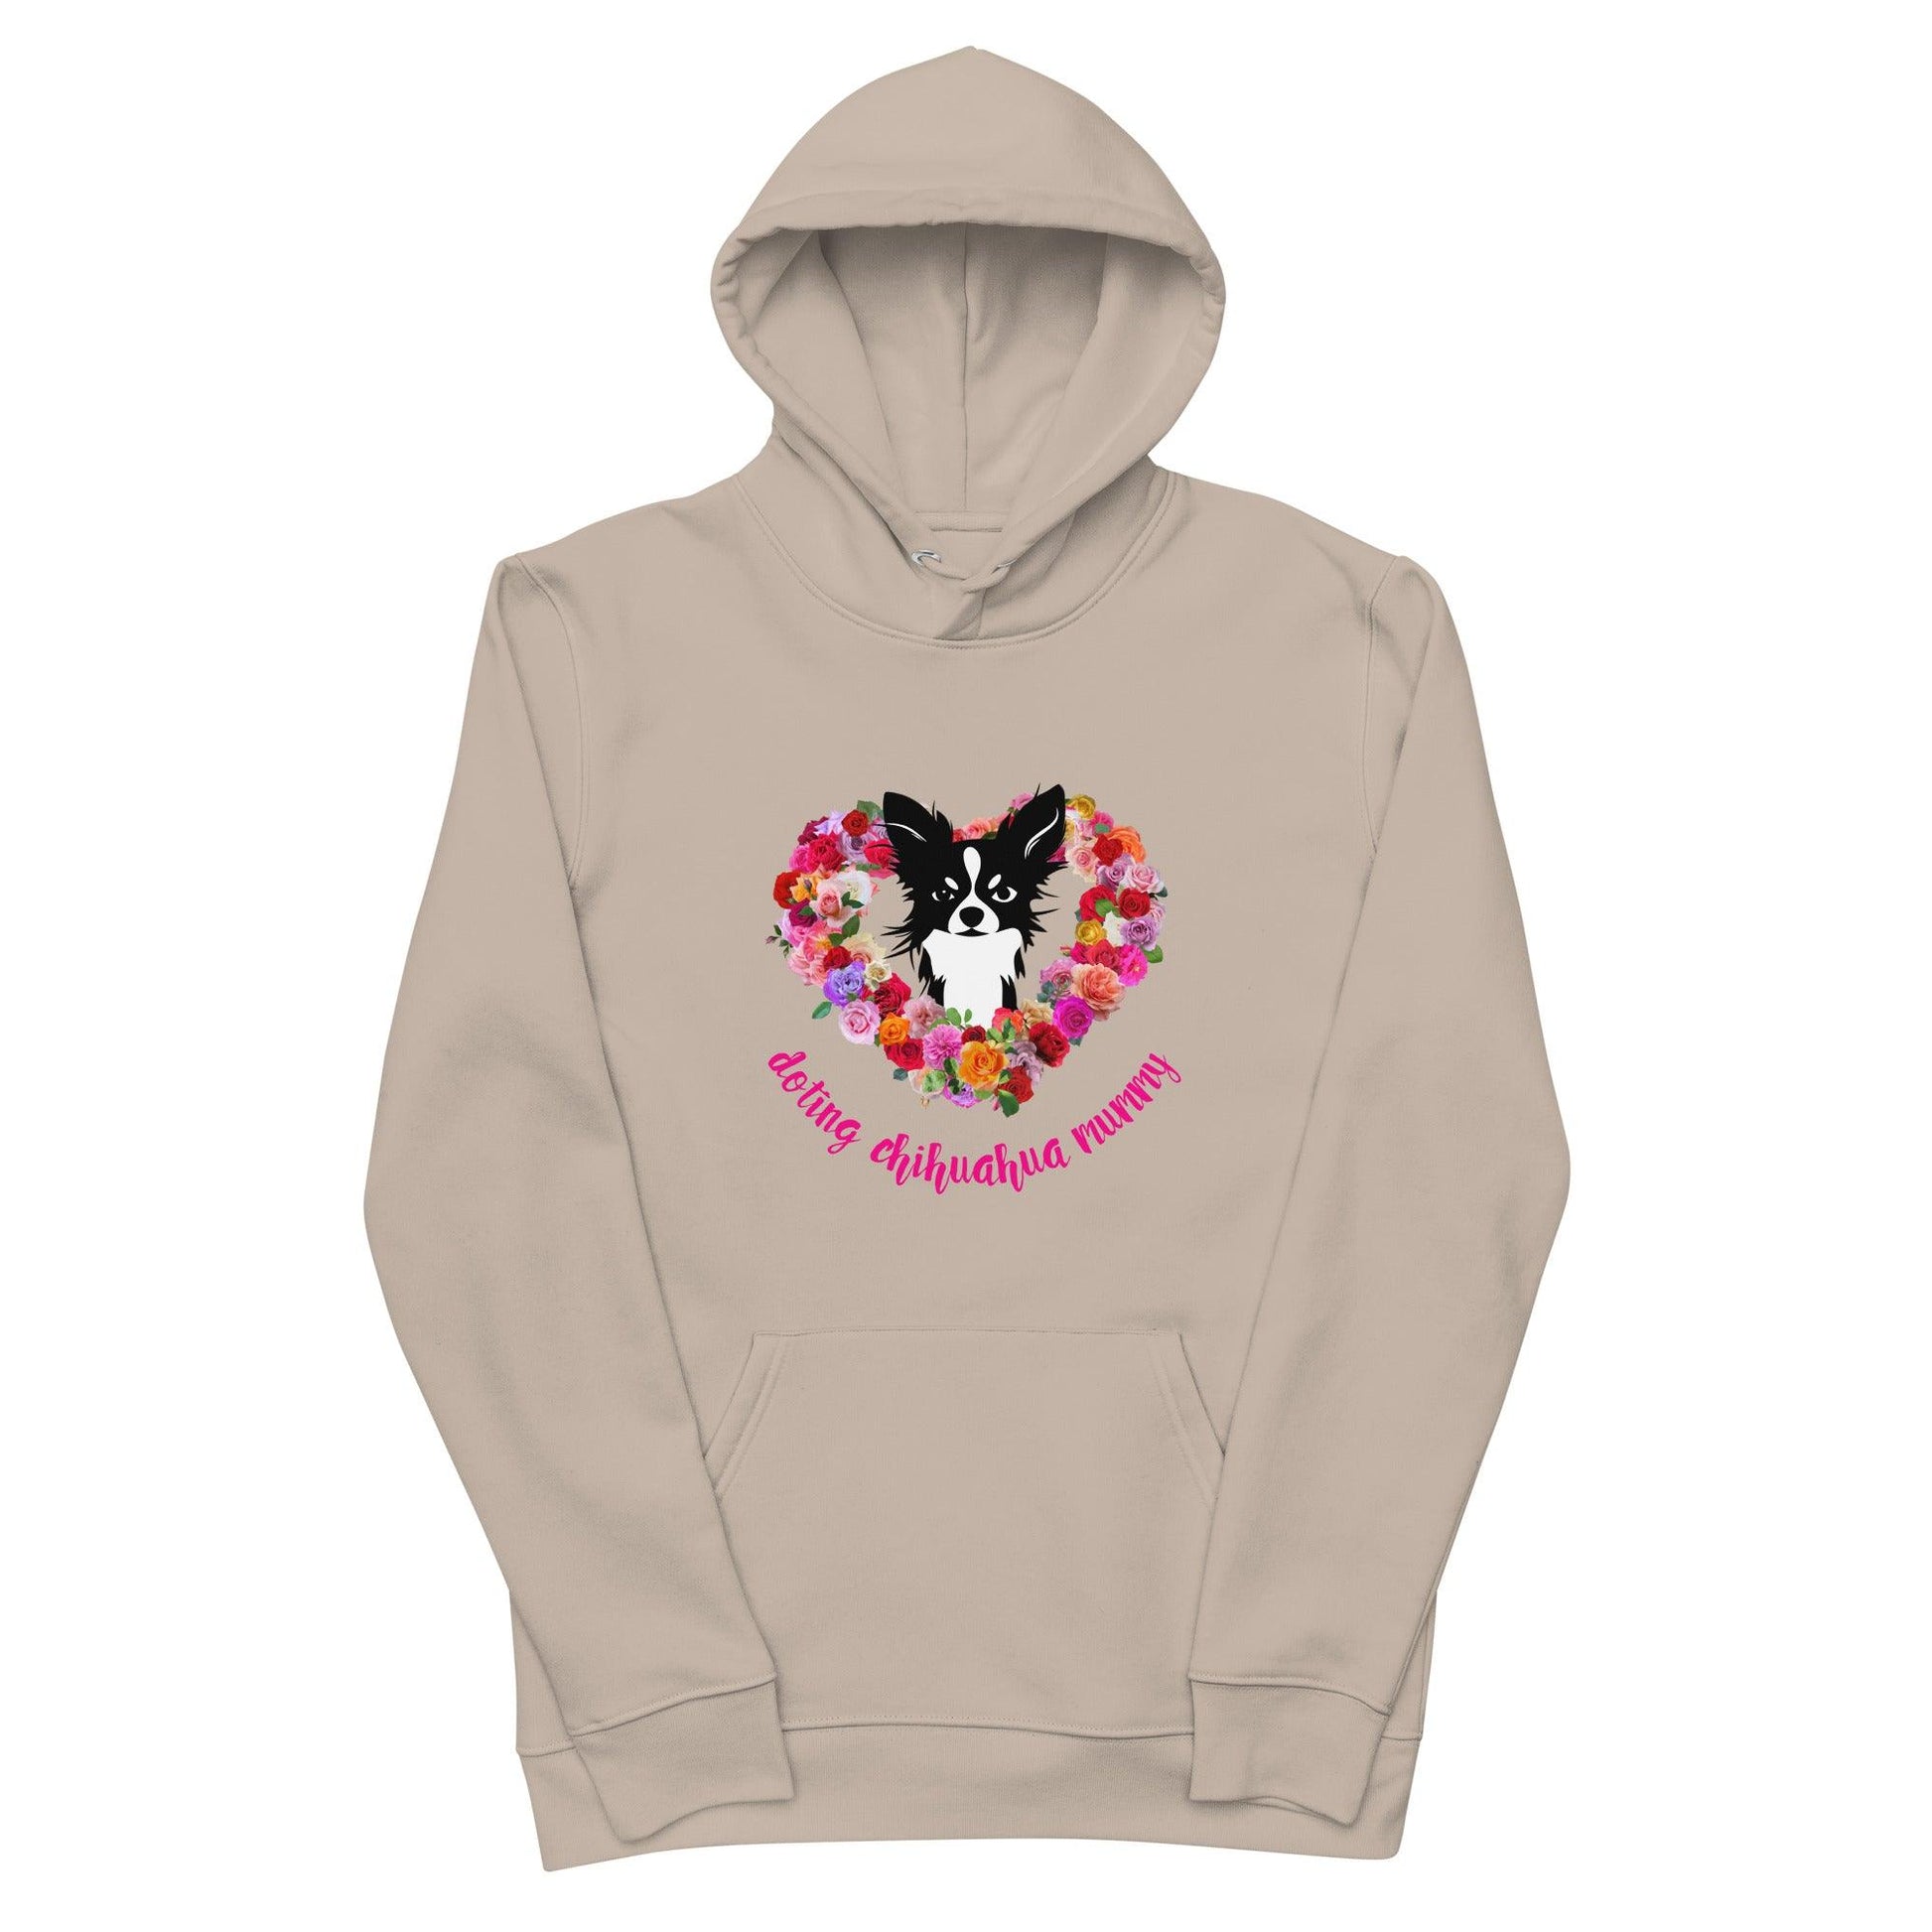 Chihuahua mum eco hoodie available in pink, white and desert. There's something so special about the bond between a girl and her chi baby. These cute little dogs charm their way deep into their mum's heart. This soft and comfy chihuahua and roses eco hoodie makes a divine Mother's Day / birthday / Christmas gift for a doting chihuahua mummy. "Aw" guaranteed! Design by Renate Kriegler for Chimigos.